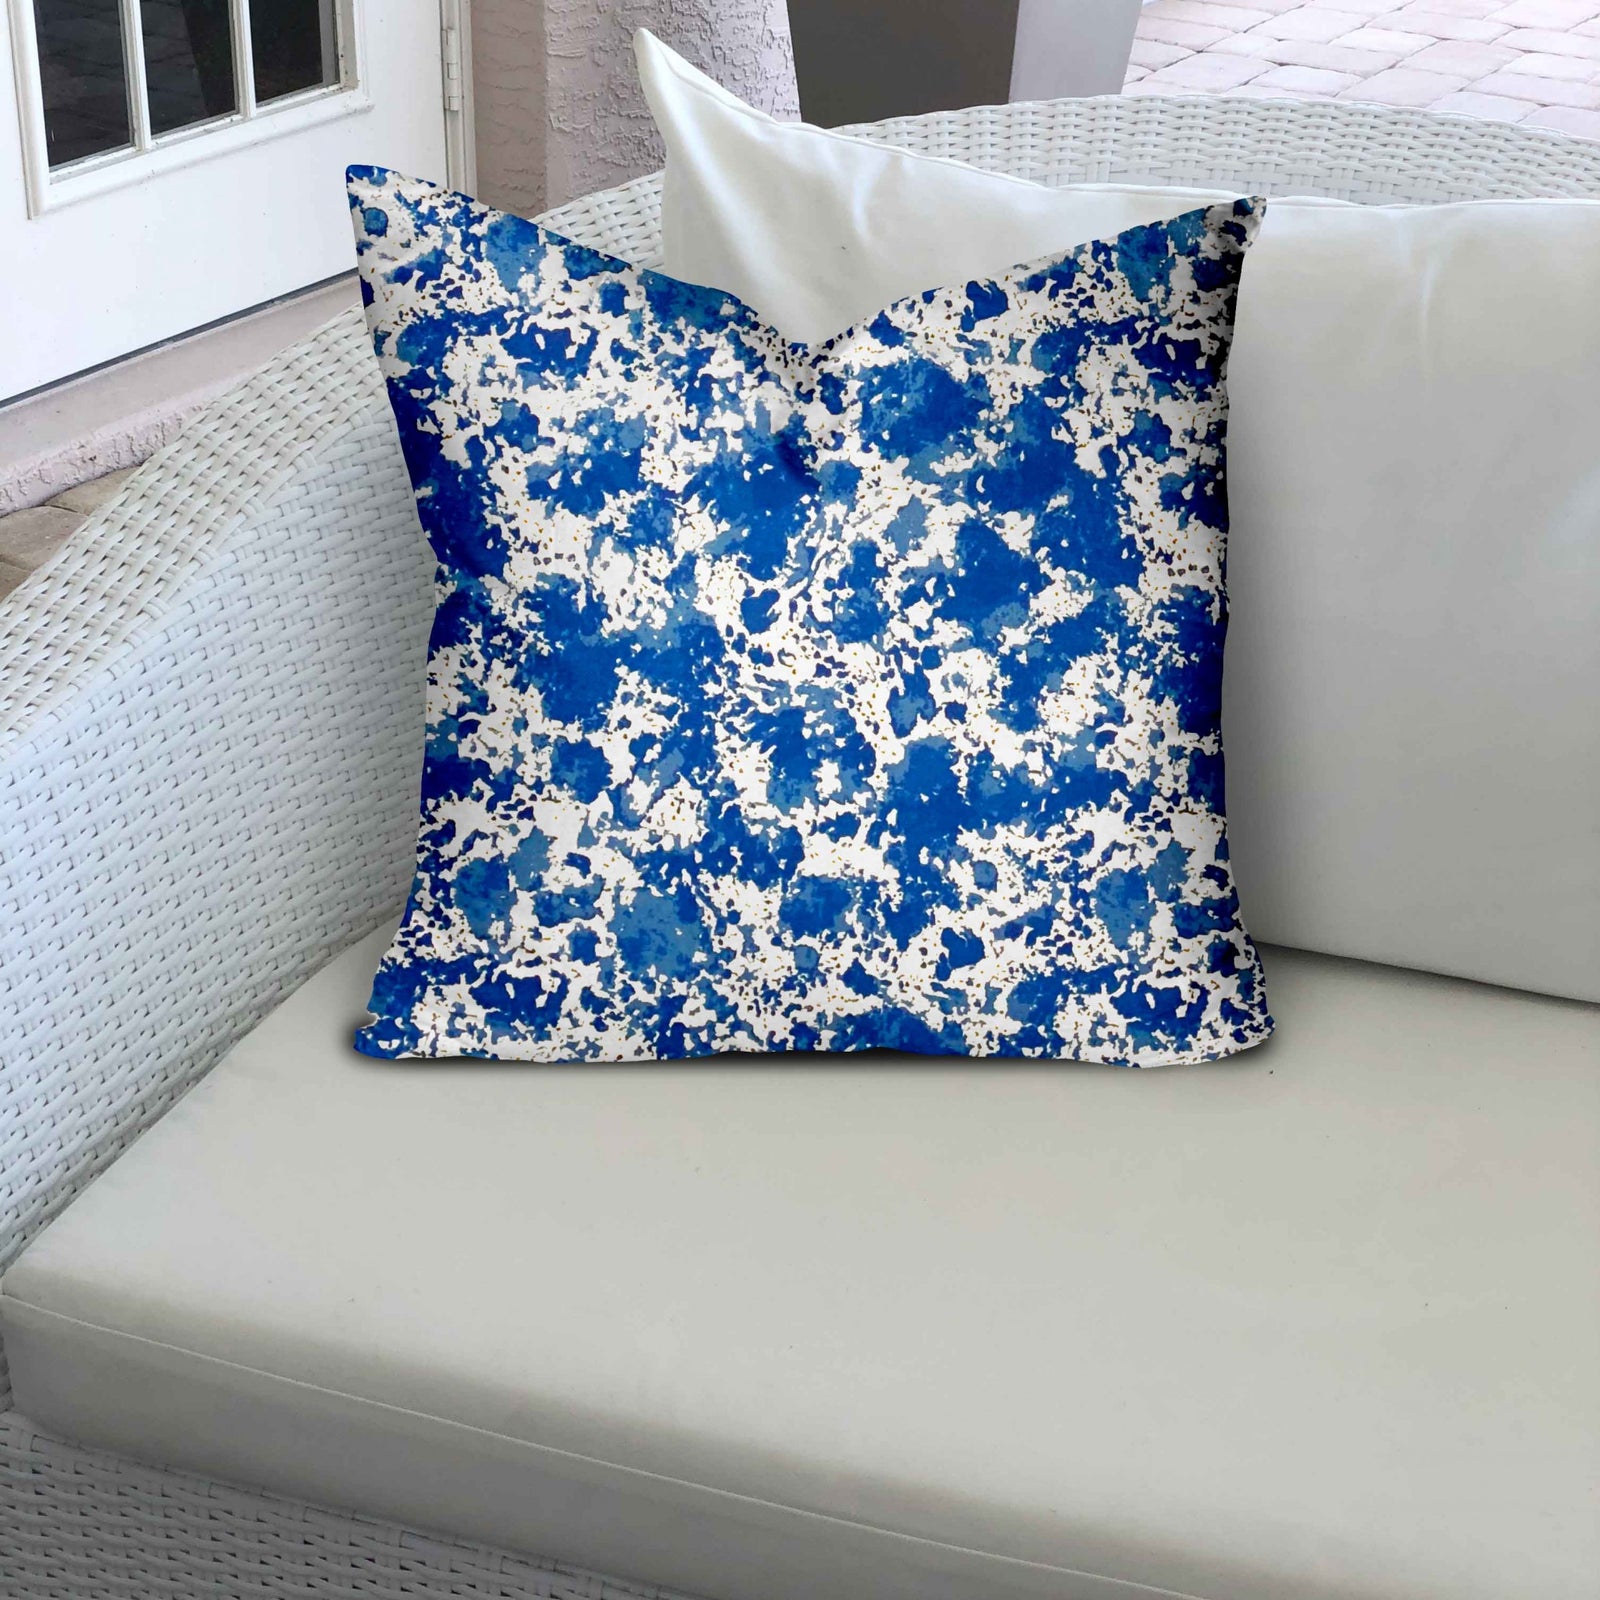 16" X 16" Blue And White Enveloped Coastal Throw Indoor Outdoor Pillow Cover